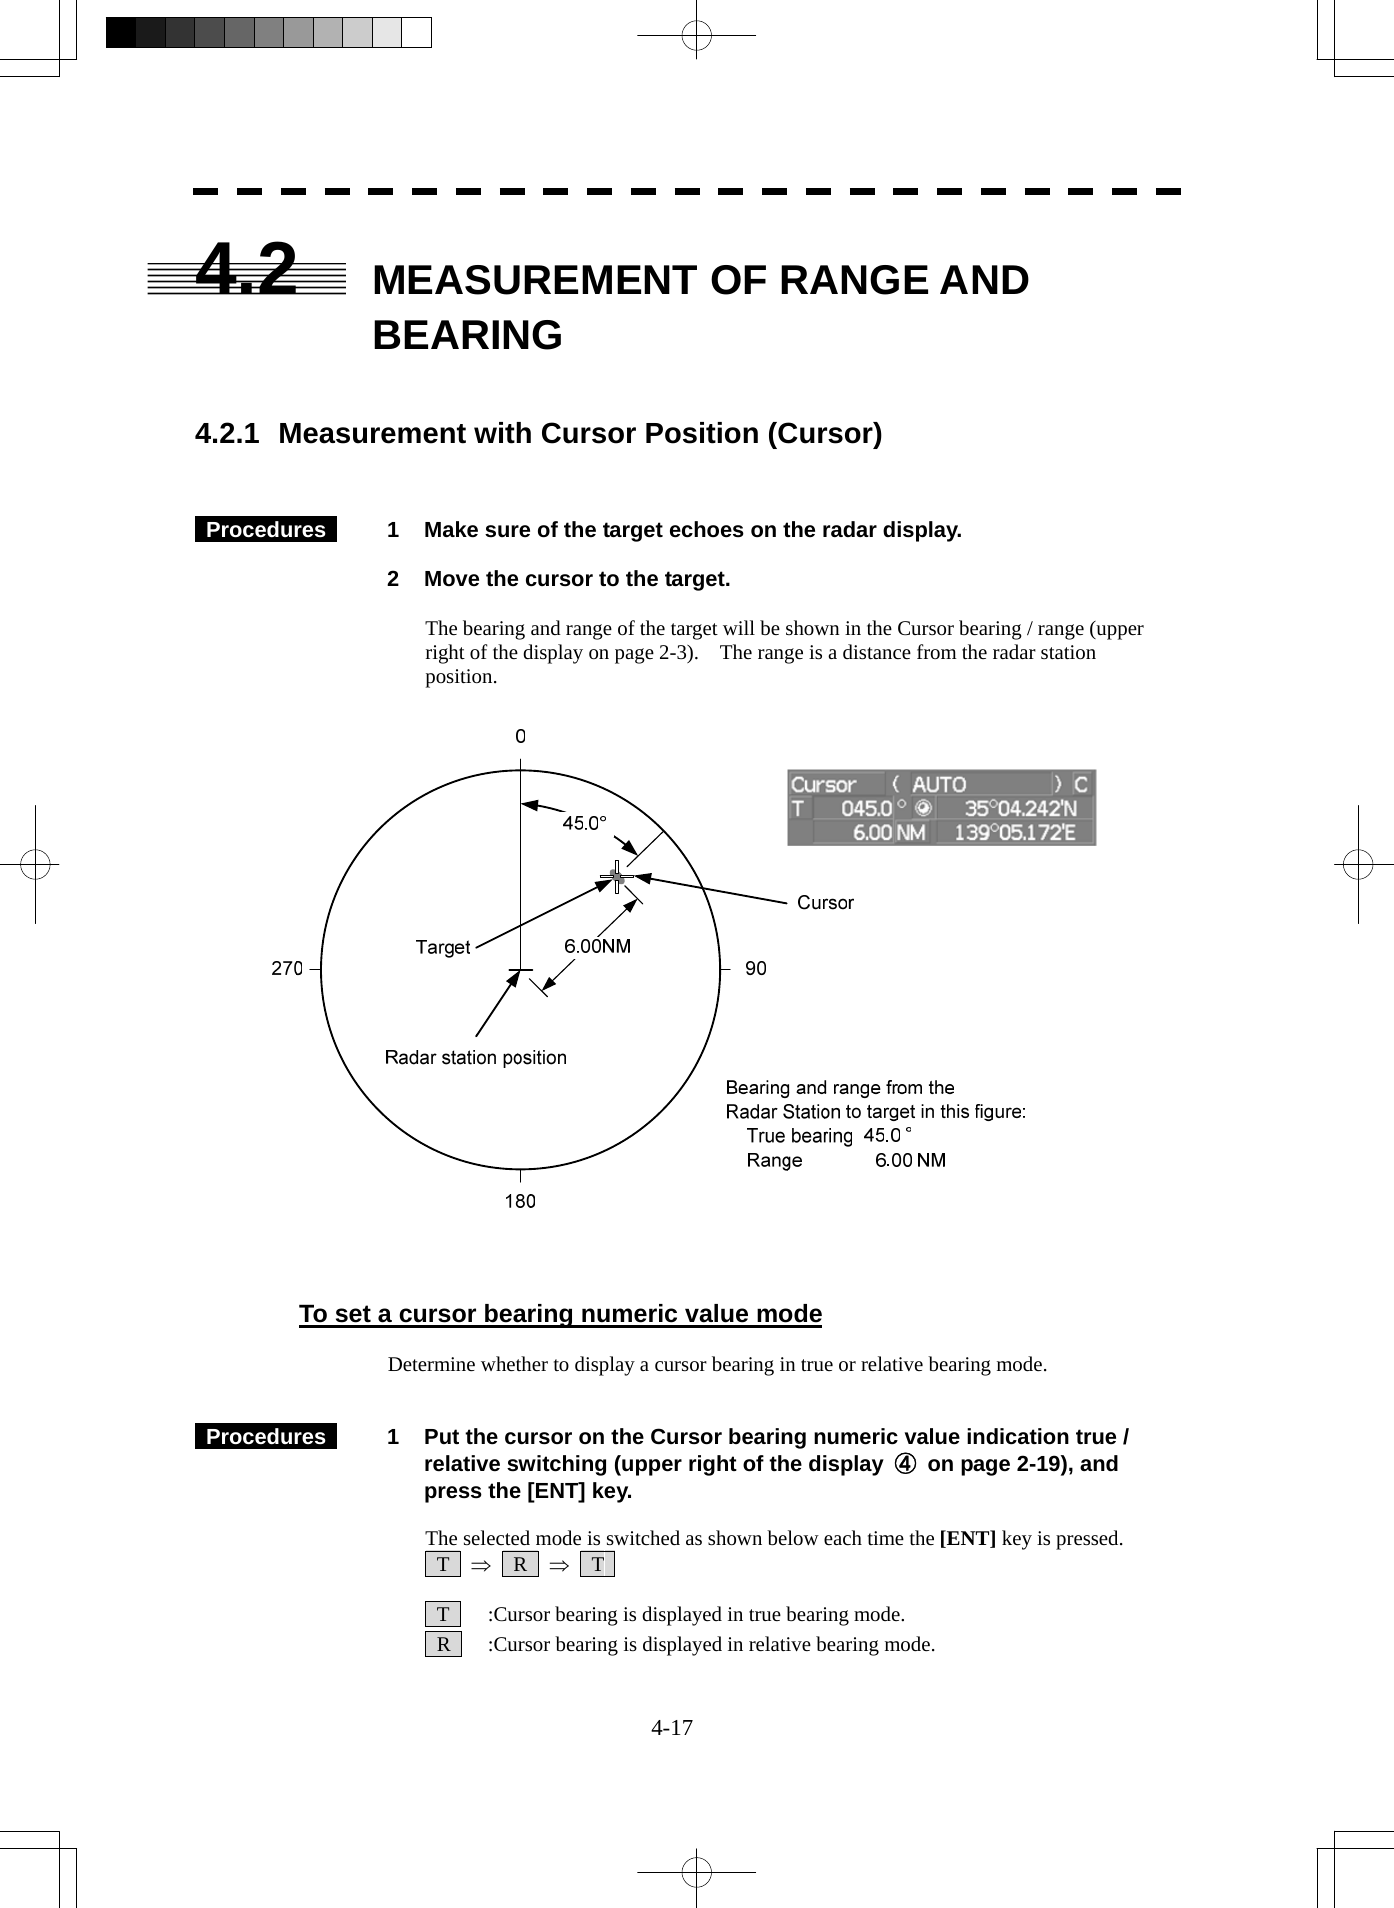  4-17 4.2  MEASUREMENT OF RANGE AND BEARING   4.2.1  Measurement with Cursor Position (Cursor)    Procedures   1  Make sure of the target echoes on the radar display.    2  Move the cursor to the target.  The bearing and range of the target will be shown in the Cursor bearing / range (upper right of the display on page 2-3).    The range is a distance from the radar station position.      To set a cursor bearing numeric value mode  Determine whether to display a cursor bearing in true or relative bearing mode.    Procedures   1  Put the cursor on the Cursor bearing numeric value indication true / relative switching (upper right of the display  ④  on page 2-19), and press the [ENT] key.  The selected mode is switched as shown below each time the [ENT] key is pressed.  T  ⇒  R  ⇒  T     T    :Cursor bearing is displayed in true bearing mode.   R    :Cursor bearing is displayed in relative bearing mode. 